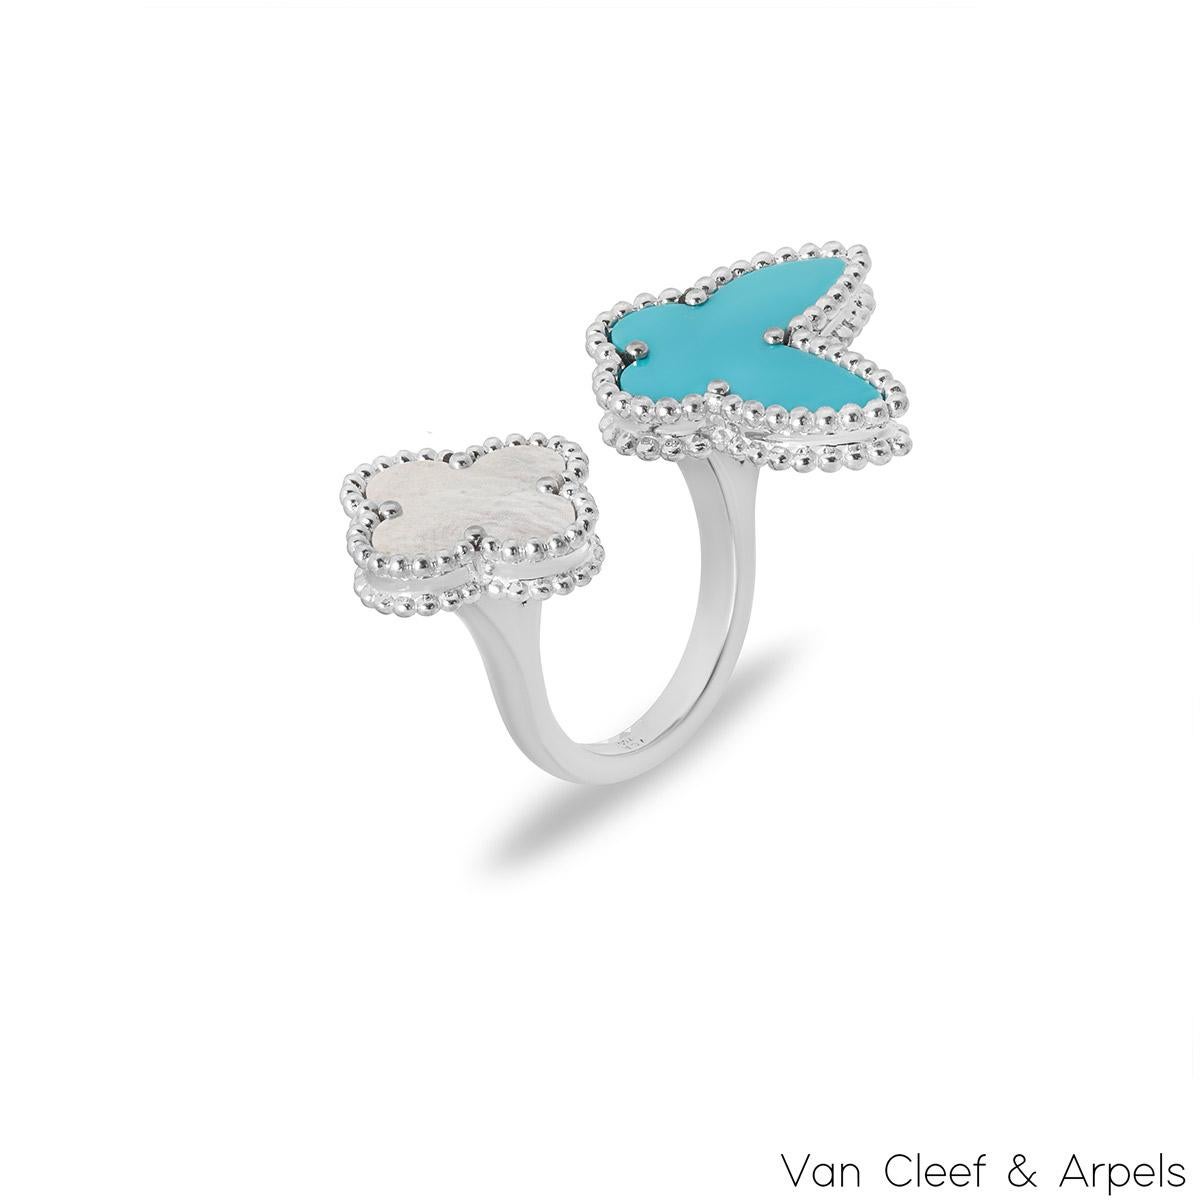 A coveted 18k white gold Van Cleef & Arpels ring from the Lucky Alhambra collection. The ring features a butterfly motif set with a turquoise inlay and a clover motif set with a mother of pearl inlay, both with a beaded outer edge. The 2.6mm wide